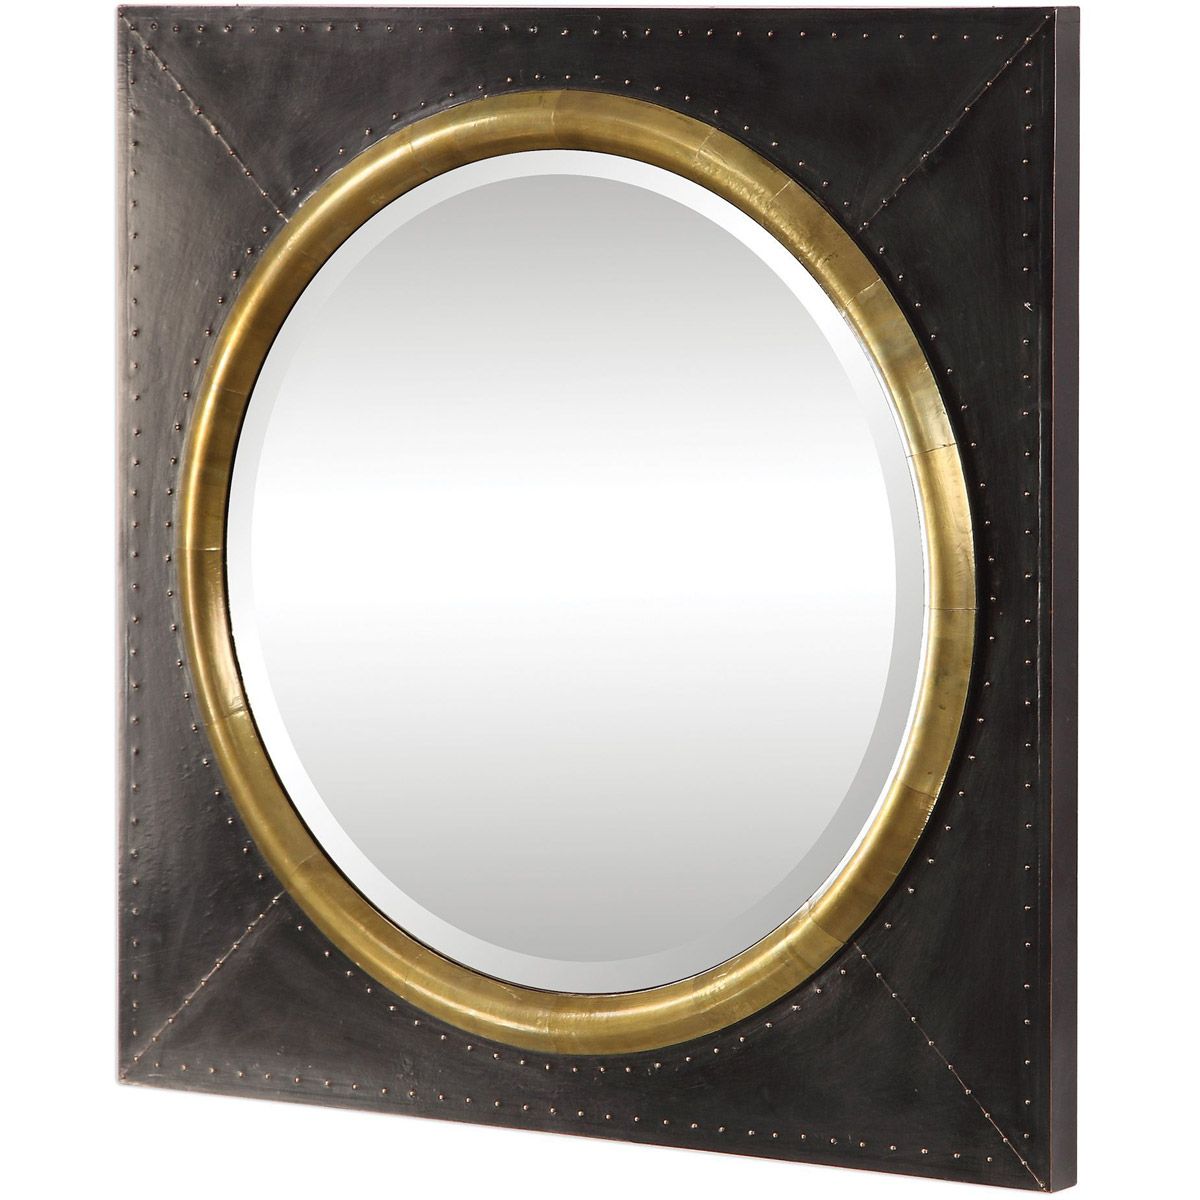 Uttermost 09453 Tallik Wall Mirror Oxidized Dark Bronze And Tarnished Throughout Copper Bronze Wall Mirrors (View 12 of 15)